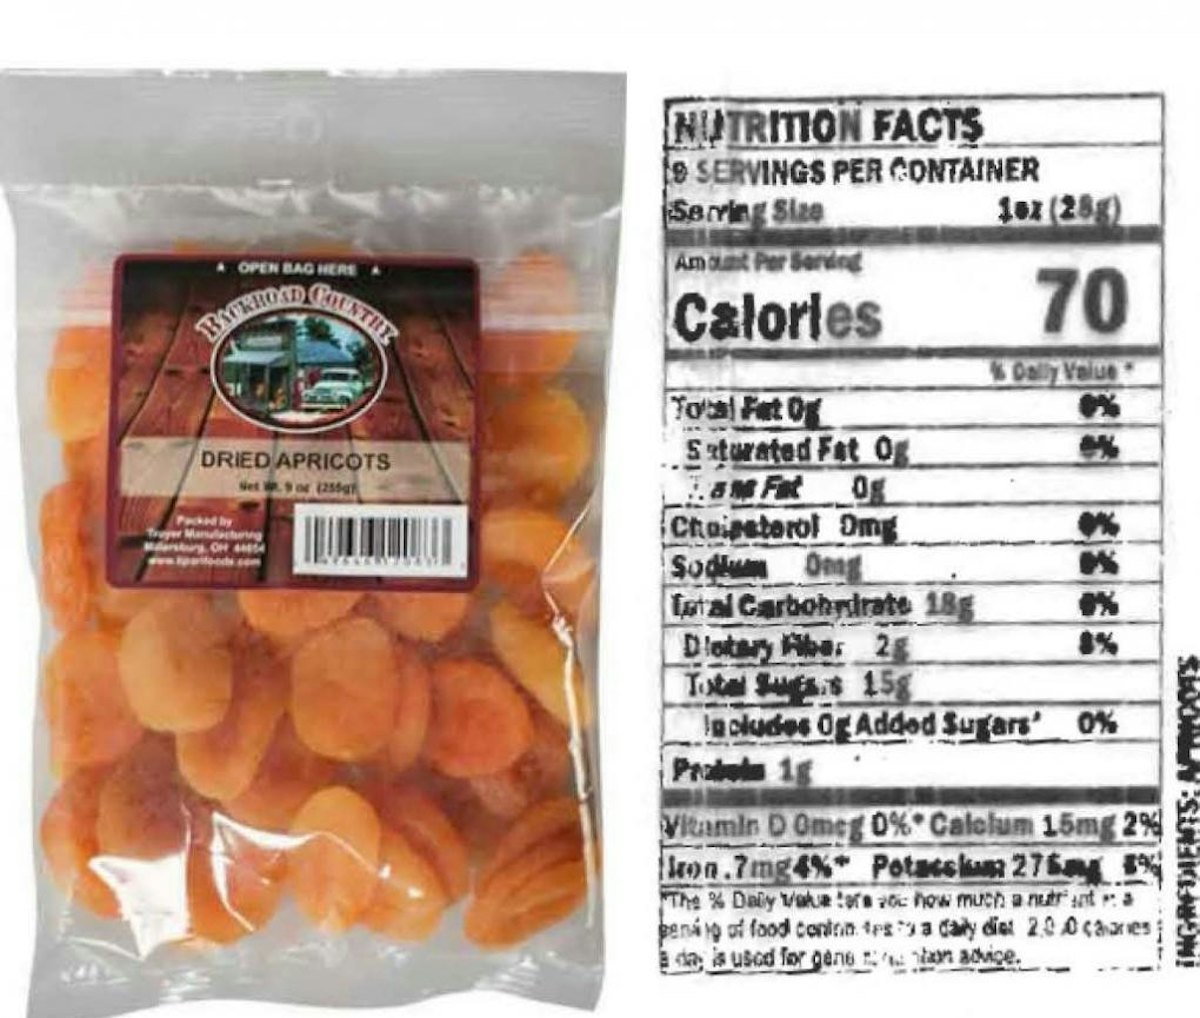 https://img.foodmanufacturing.com/files/base/indm/multi/image/2021/07/Lipari_Foods_Dried_Apricots_Press_Release..60f83ed67e587.png?auto=format%2Ccompress&fit=max&q=70&w=1200